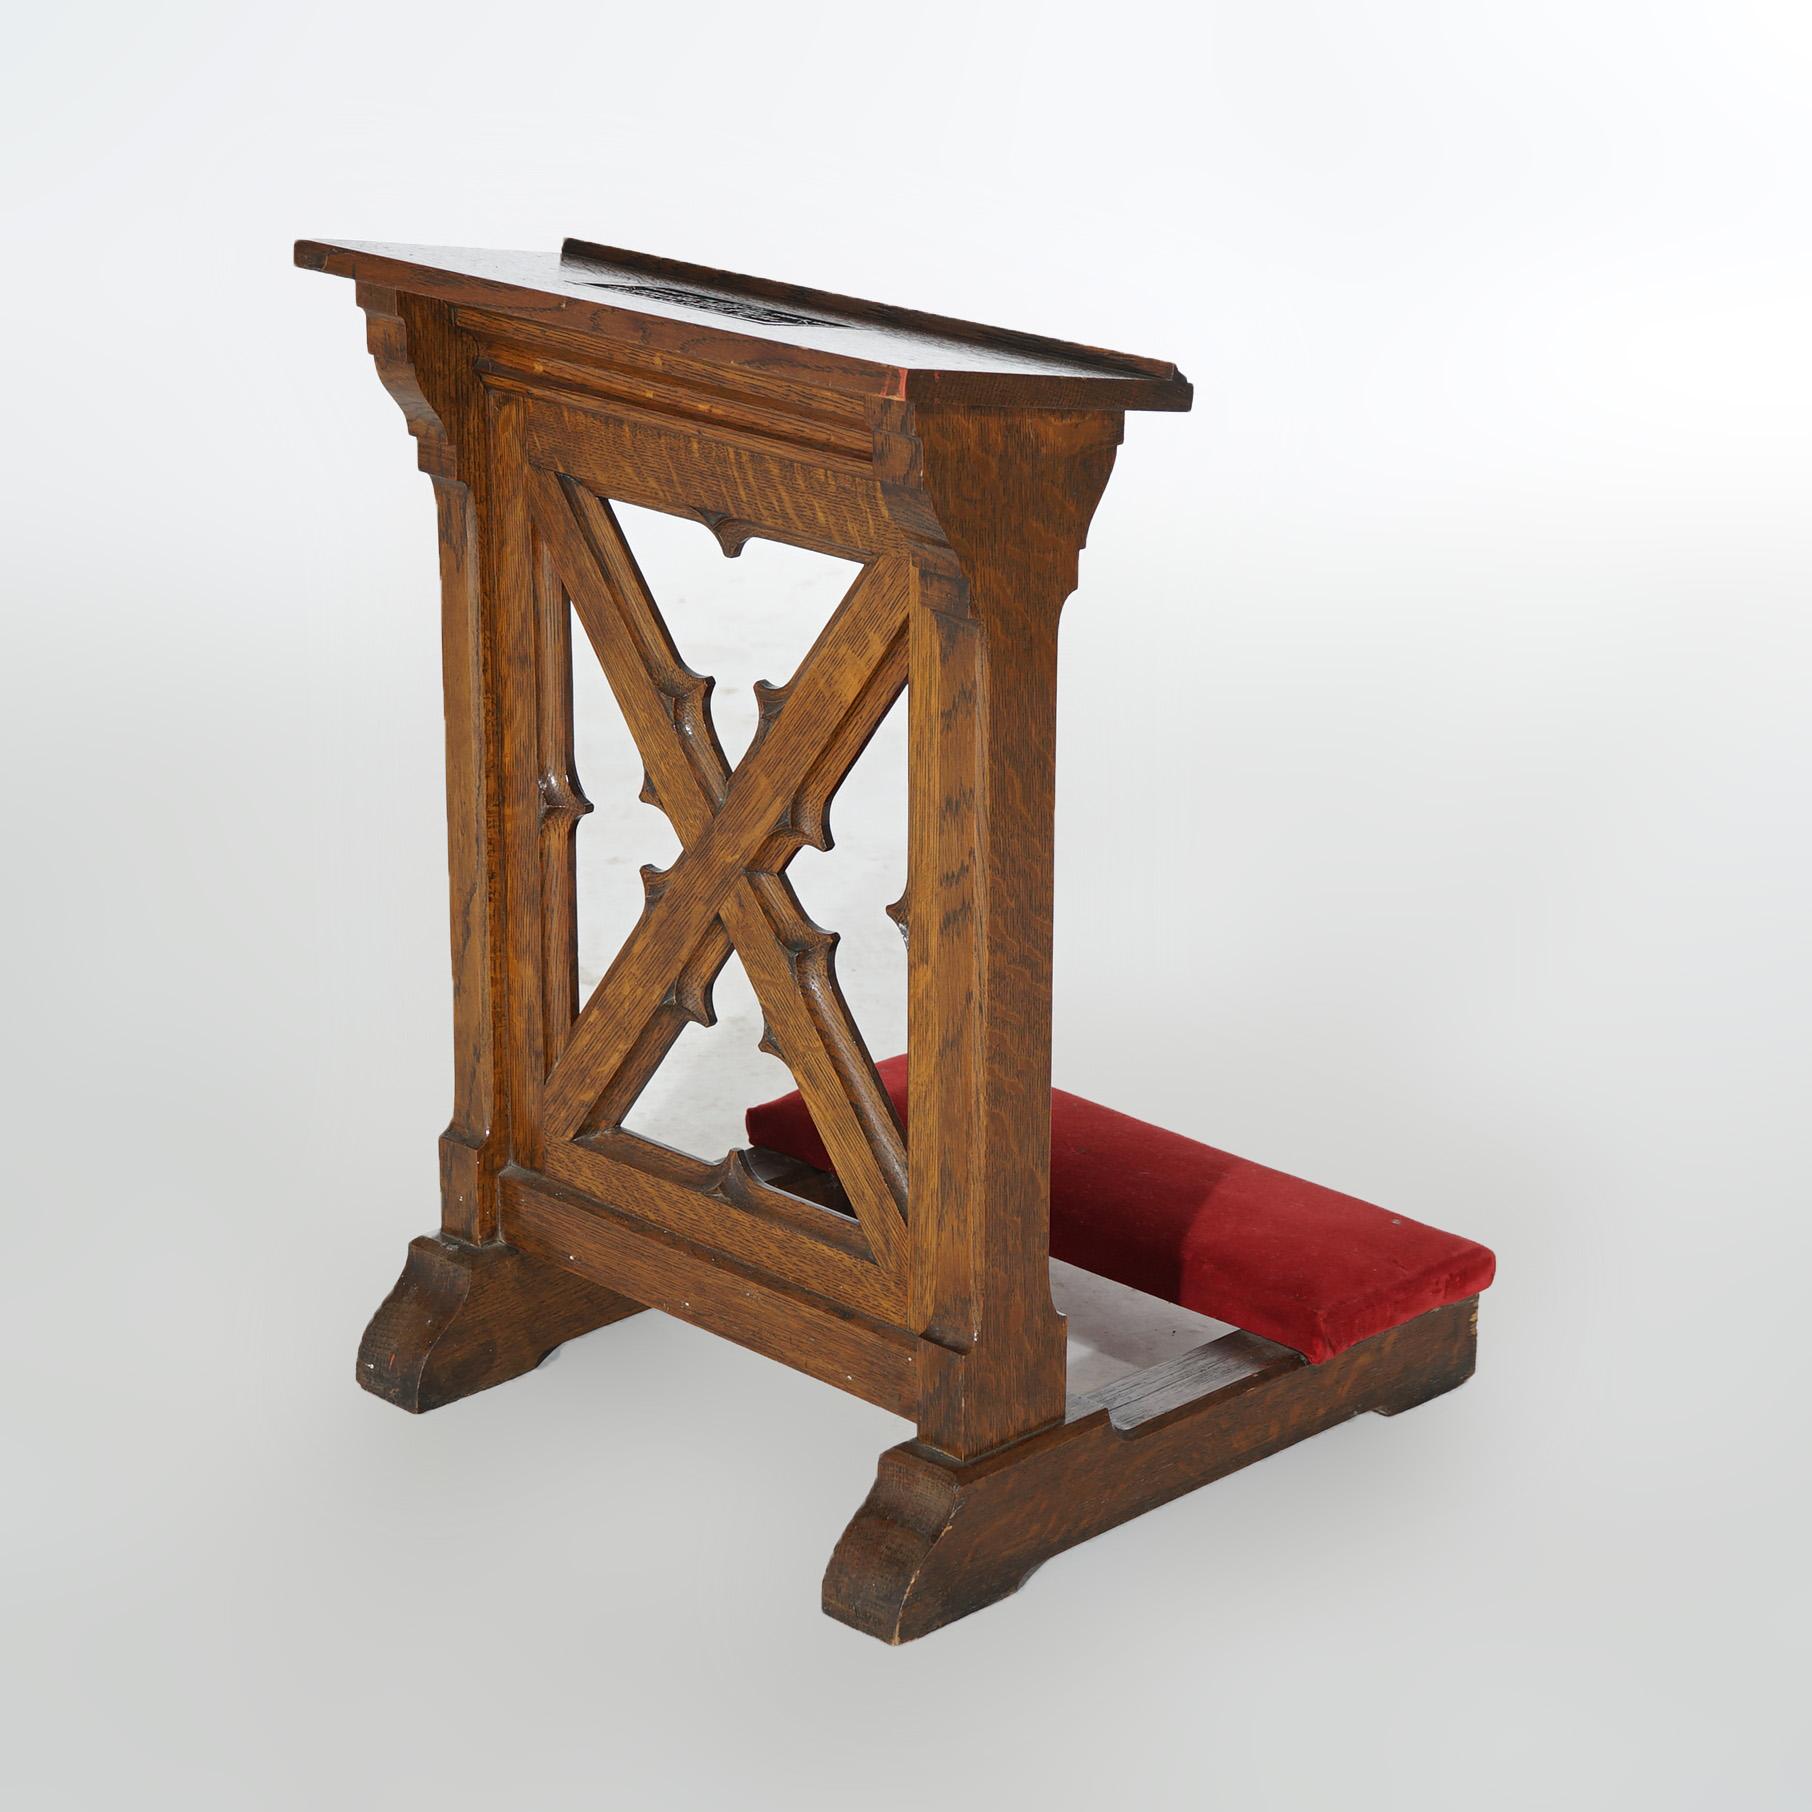 Gothic Revival Antique Gothic Carved Oak Kneeling Bench with Velvet Pad 19th C For Sale